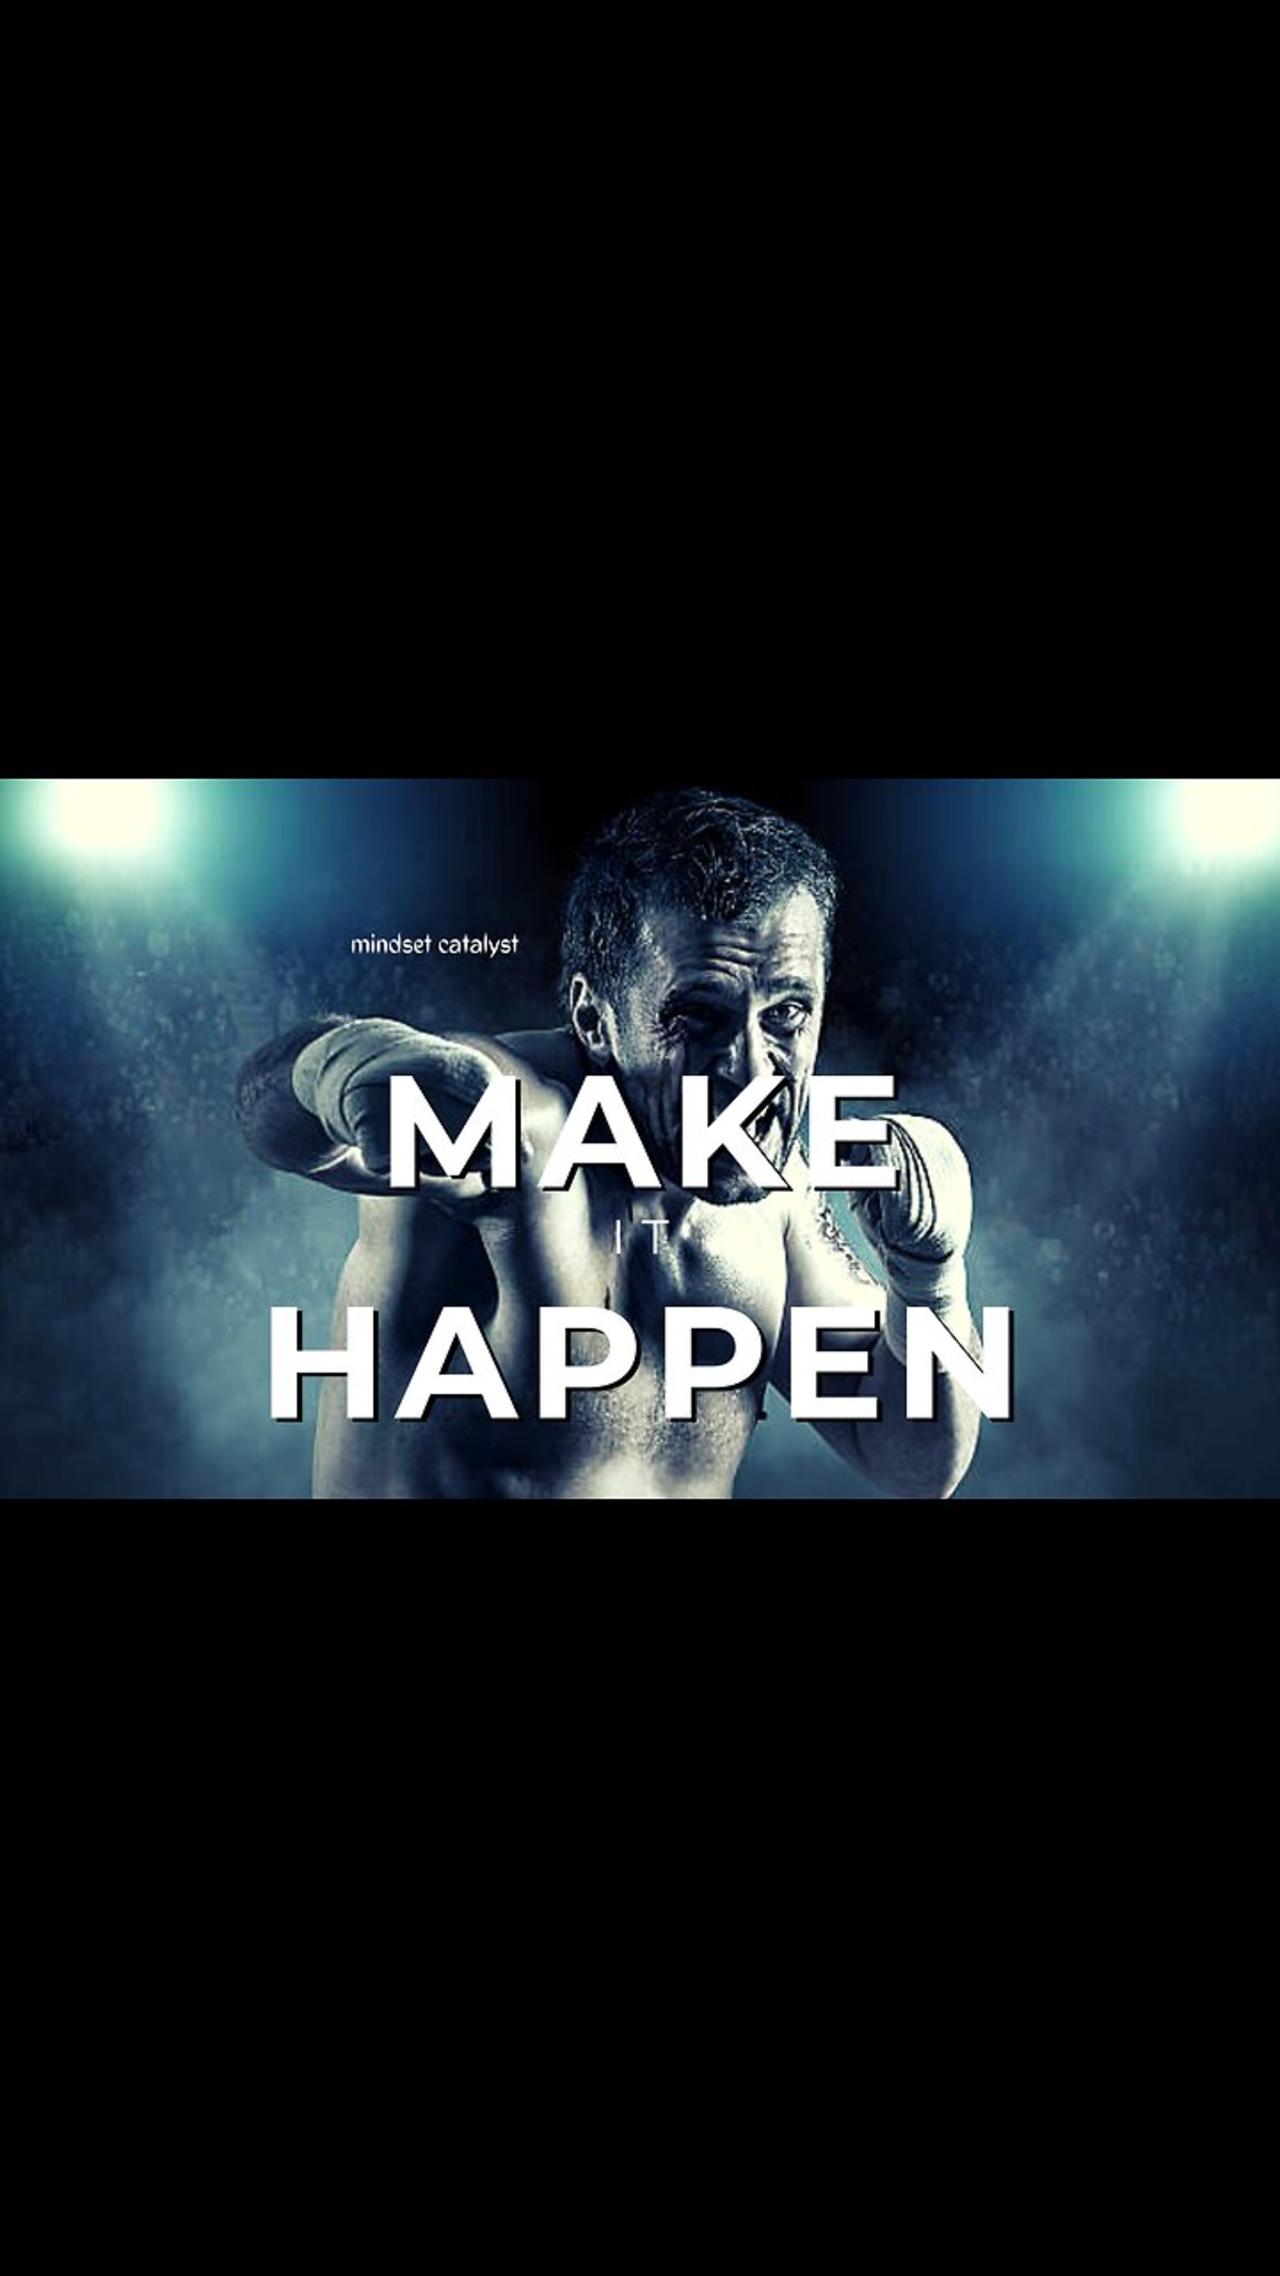 Only You Can Make It Happen